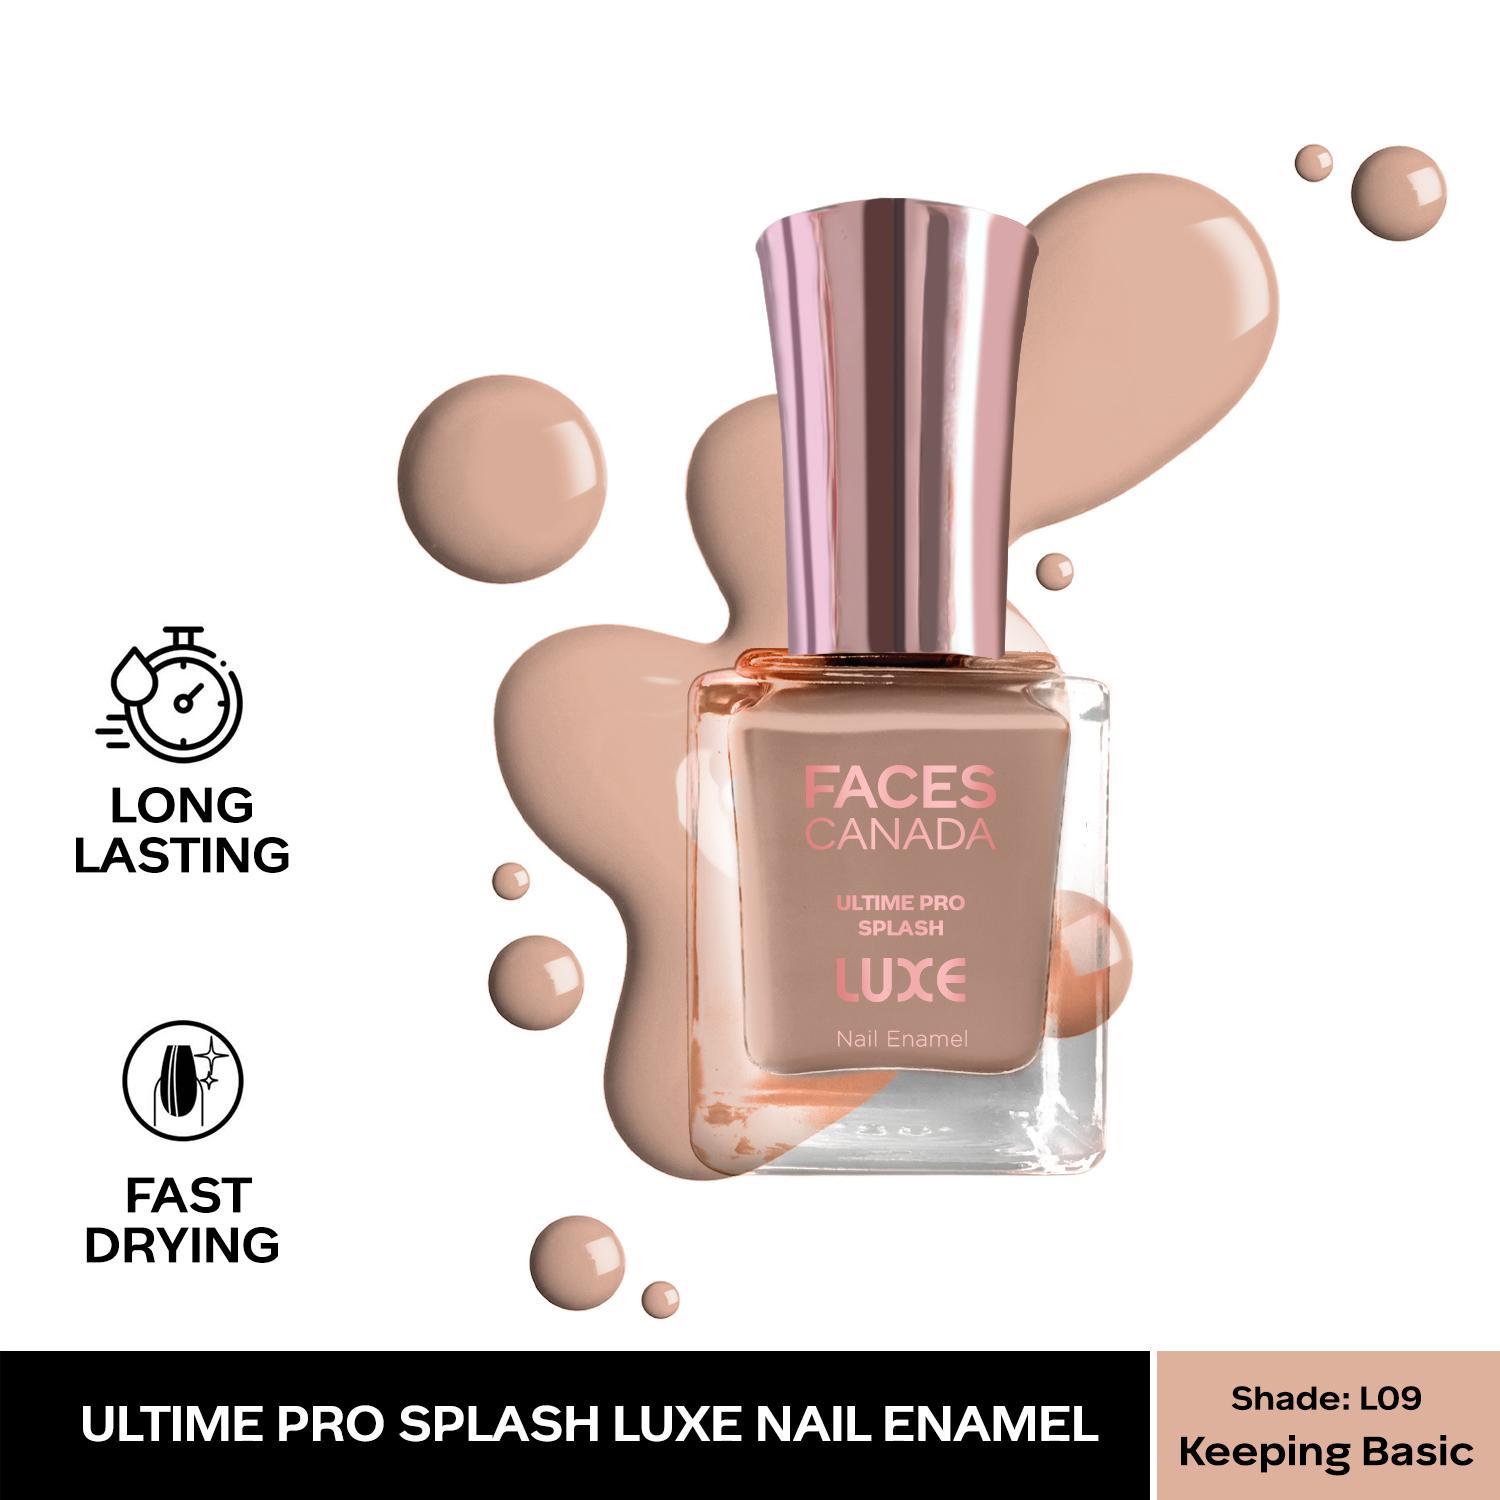 Faces Canada | Faces Canada Ultime Pro Splash Luxe Nail Enamel - Keeping Basic (L09), Glossy Finish (12 ml)